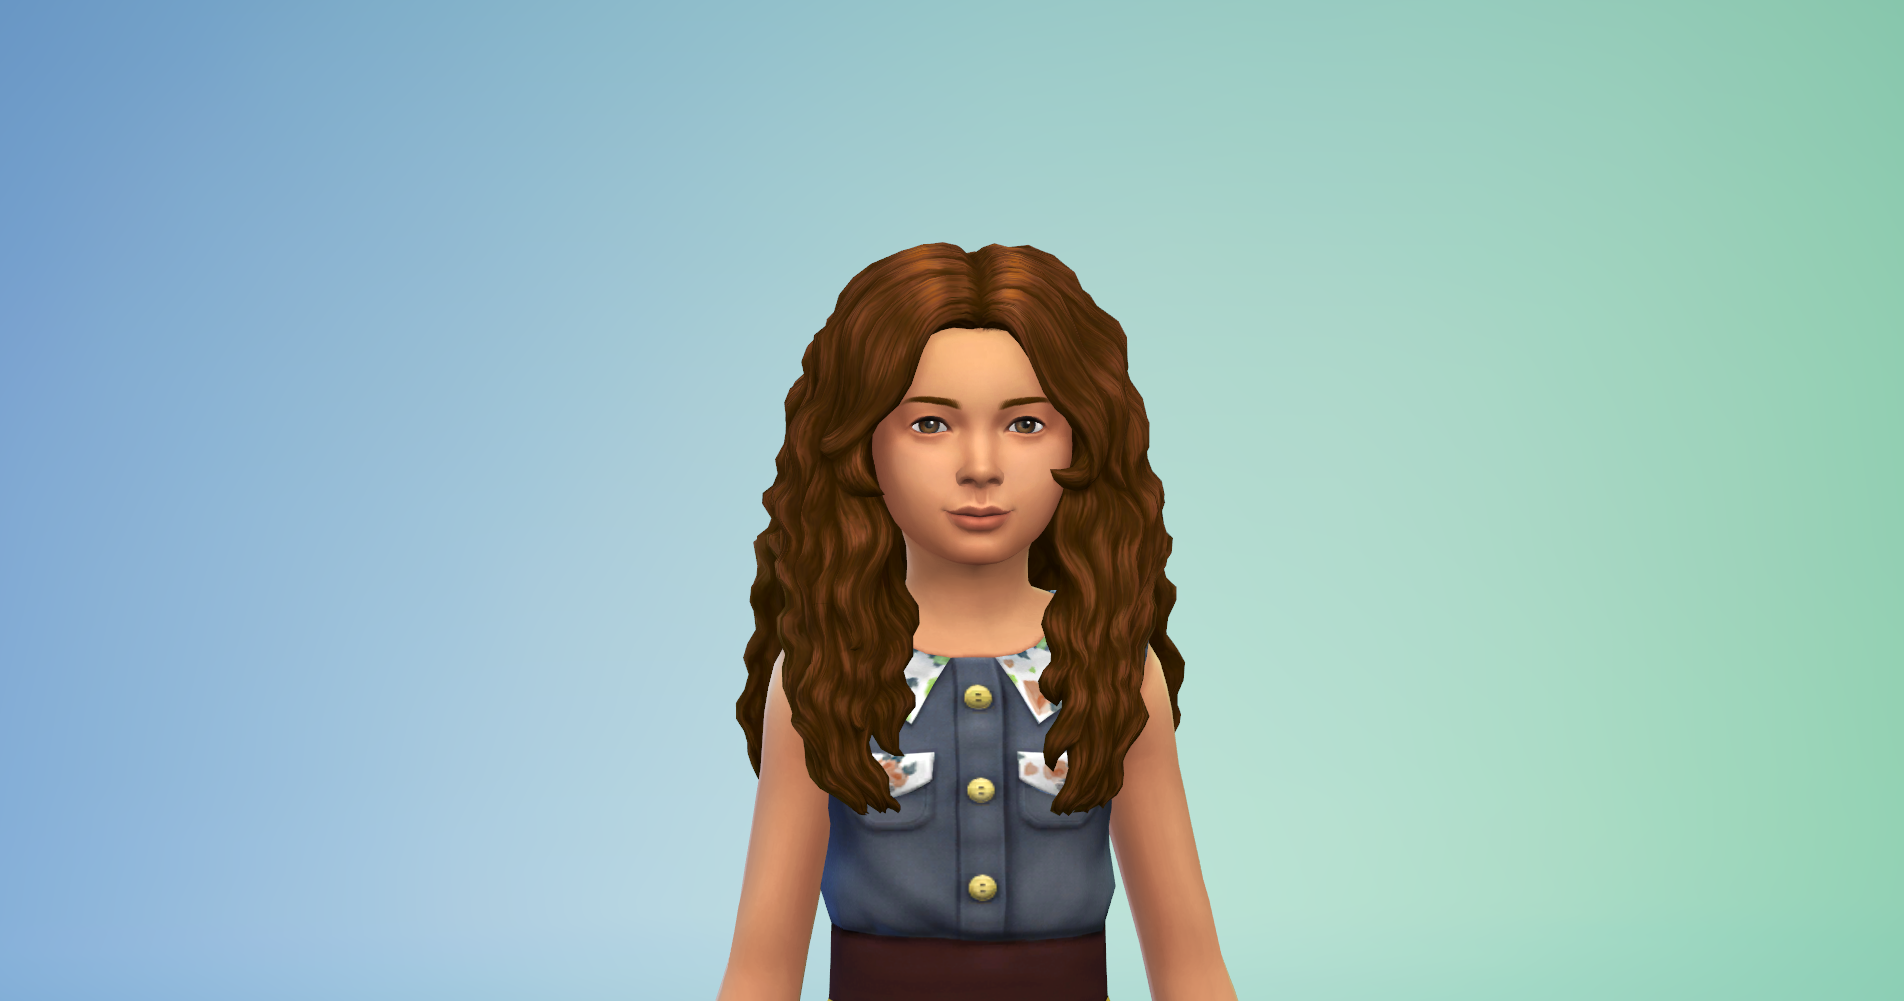 The Sims 4: Latest Patch Adds New Hairstyles for Children & Toddlers |  SimsVIP